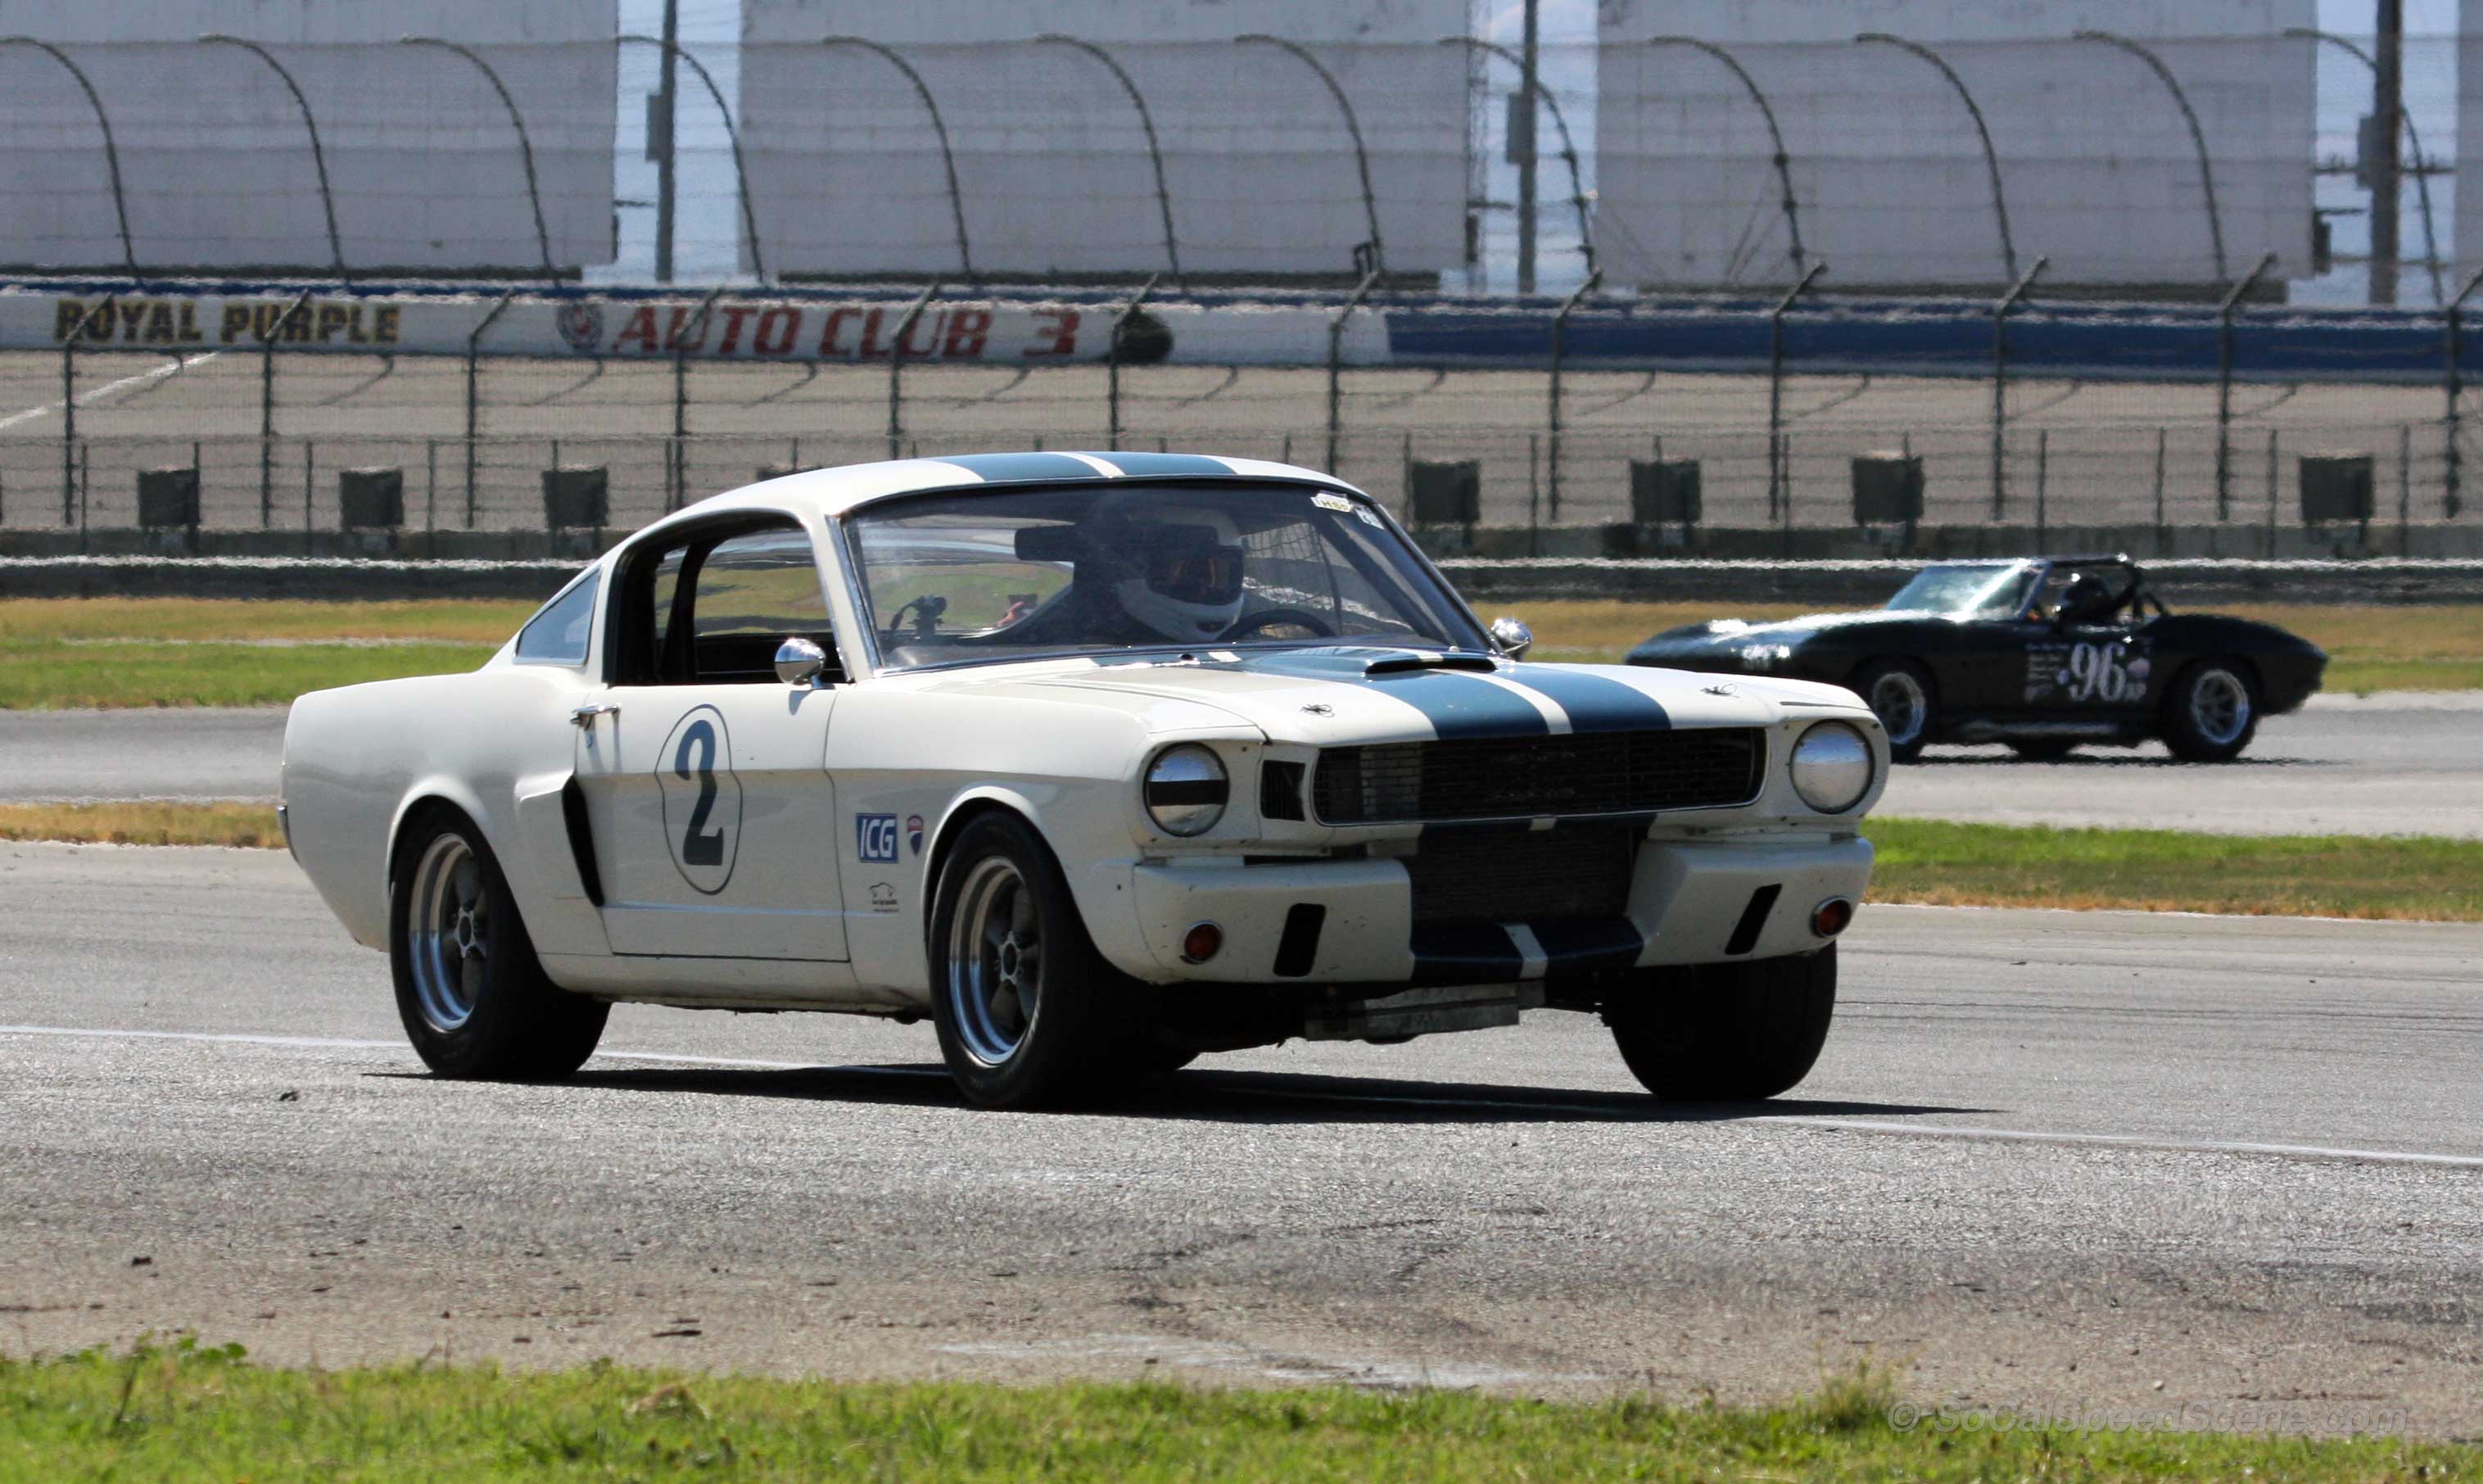 Shelby Mustang Gt350 Fastback Muscle Car Race Car Car 3032x1812